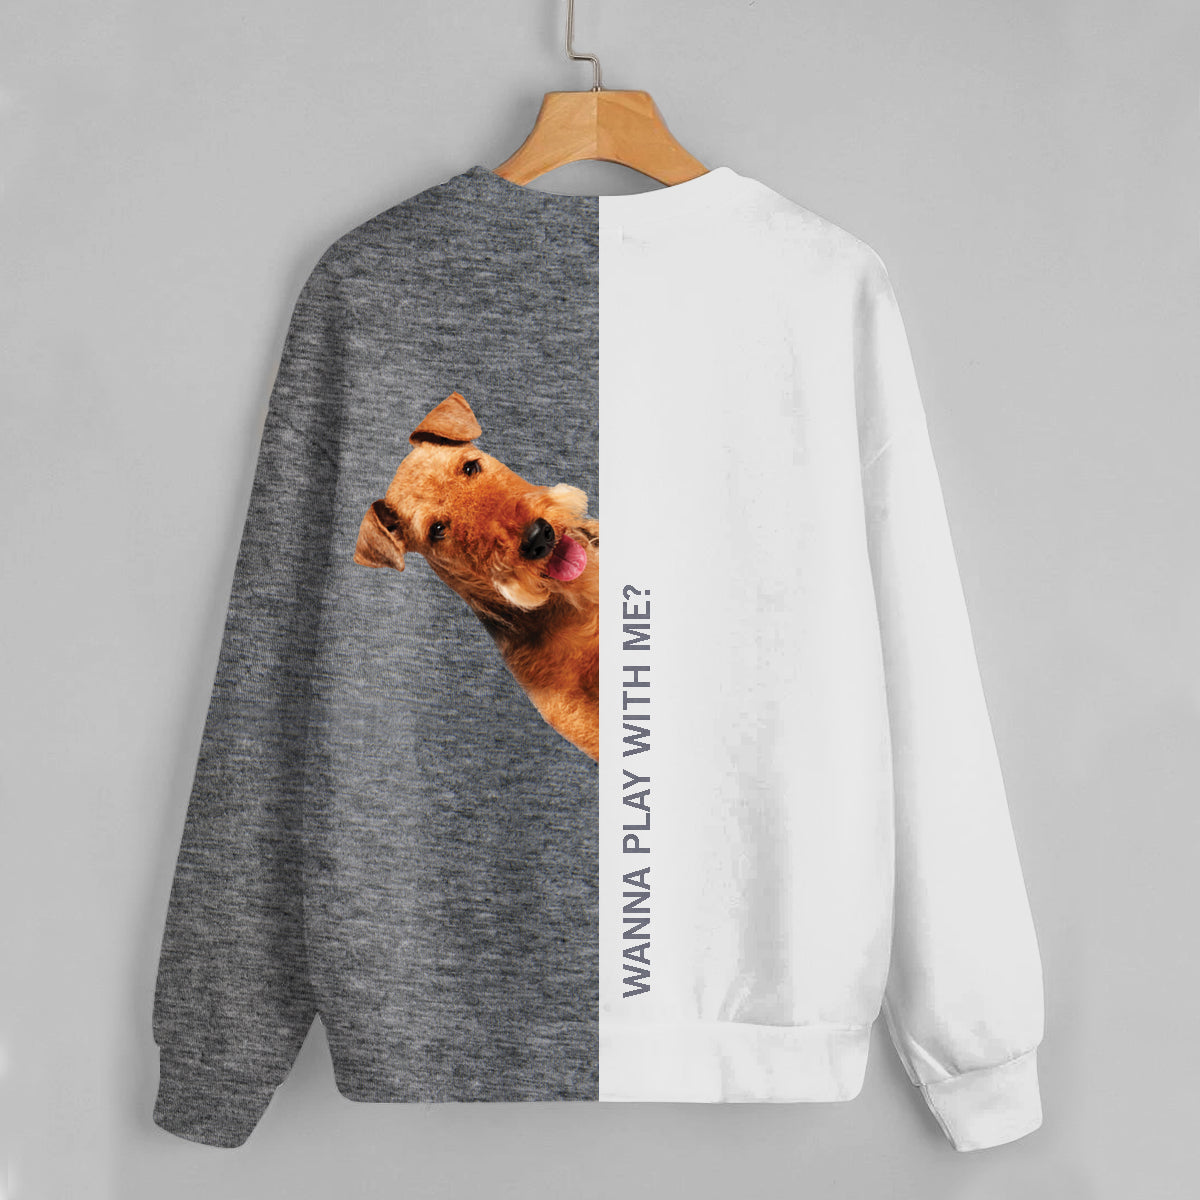 Funny Happy Time - Airedale Terrier Sweatshirt V1